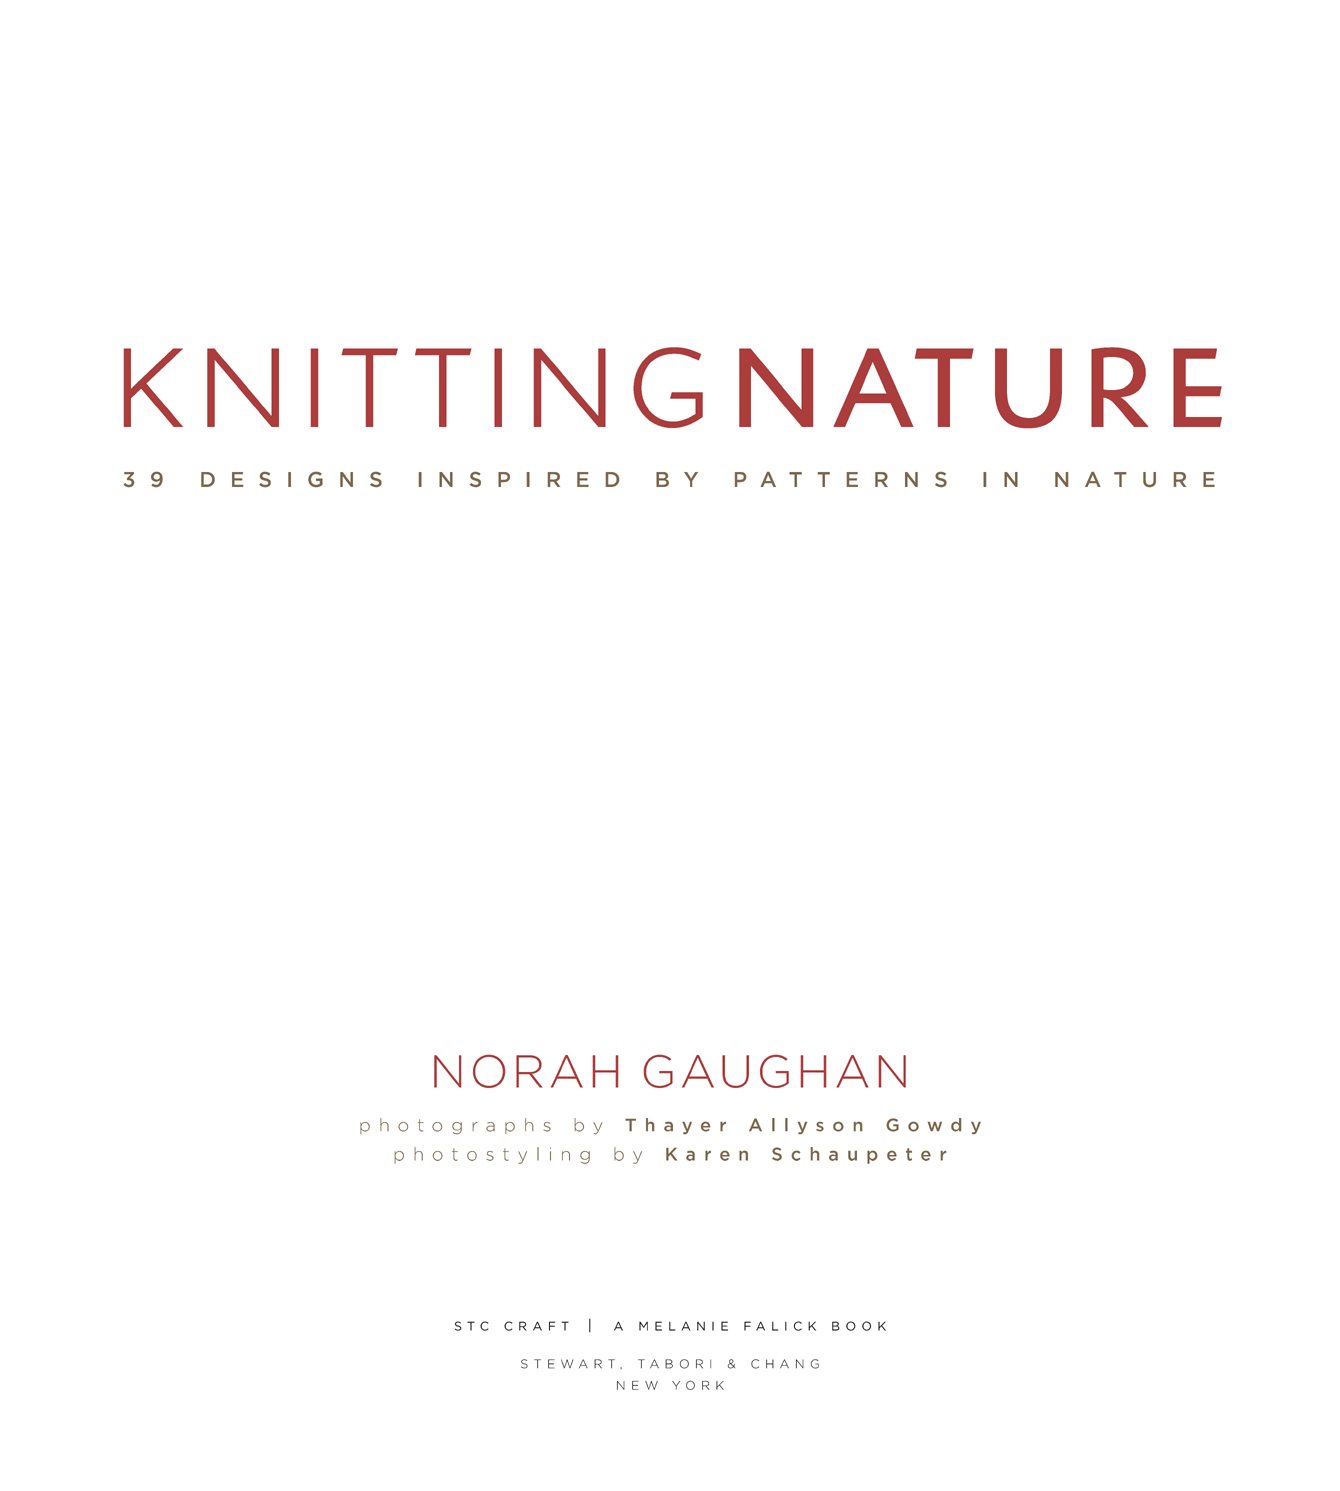 KNITTING NATURE 39 DESIGNS INSPIRED BY PATTERNS IN NATURE NORAH GAUGHAN - photo 3